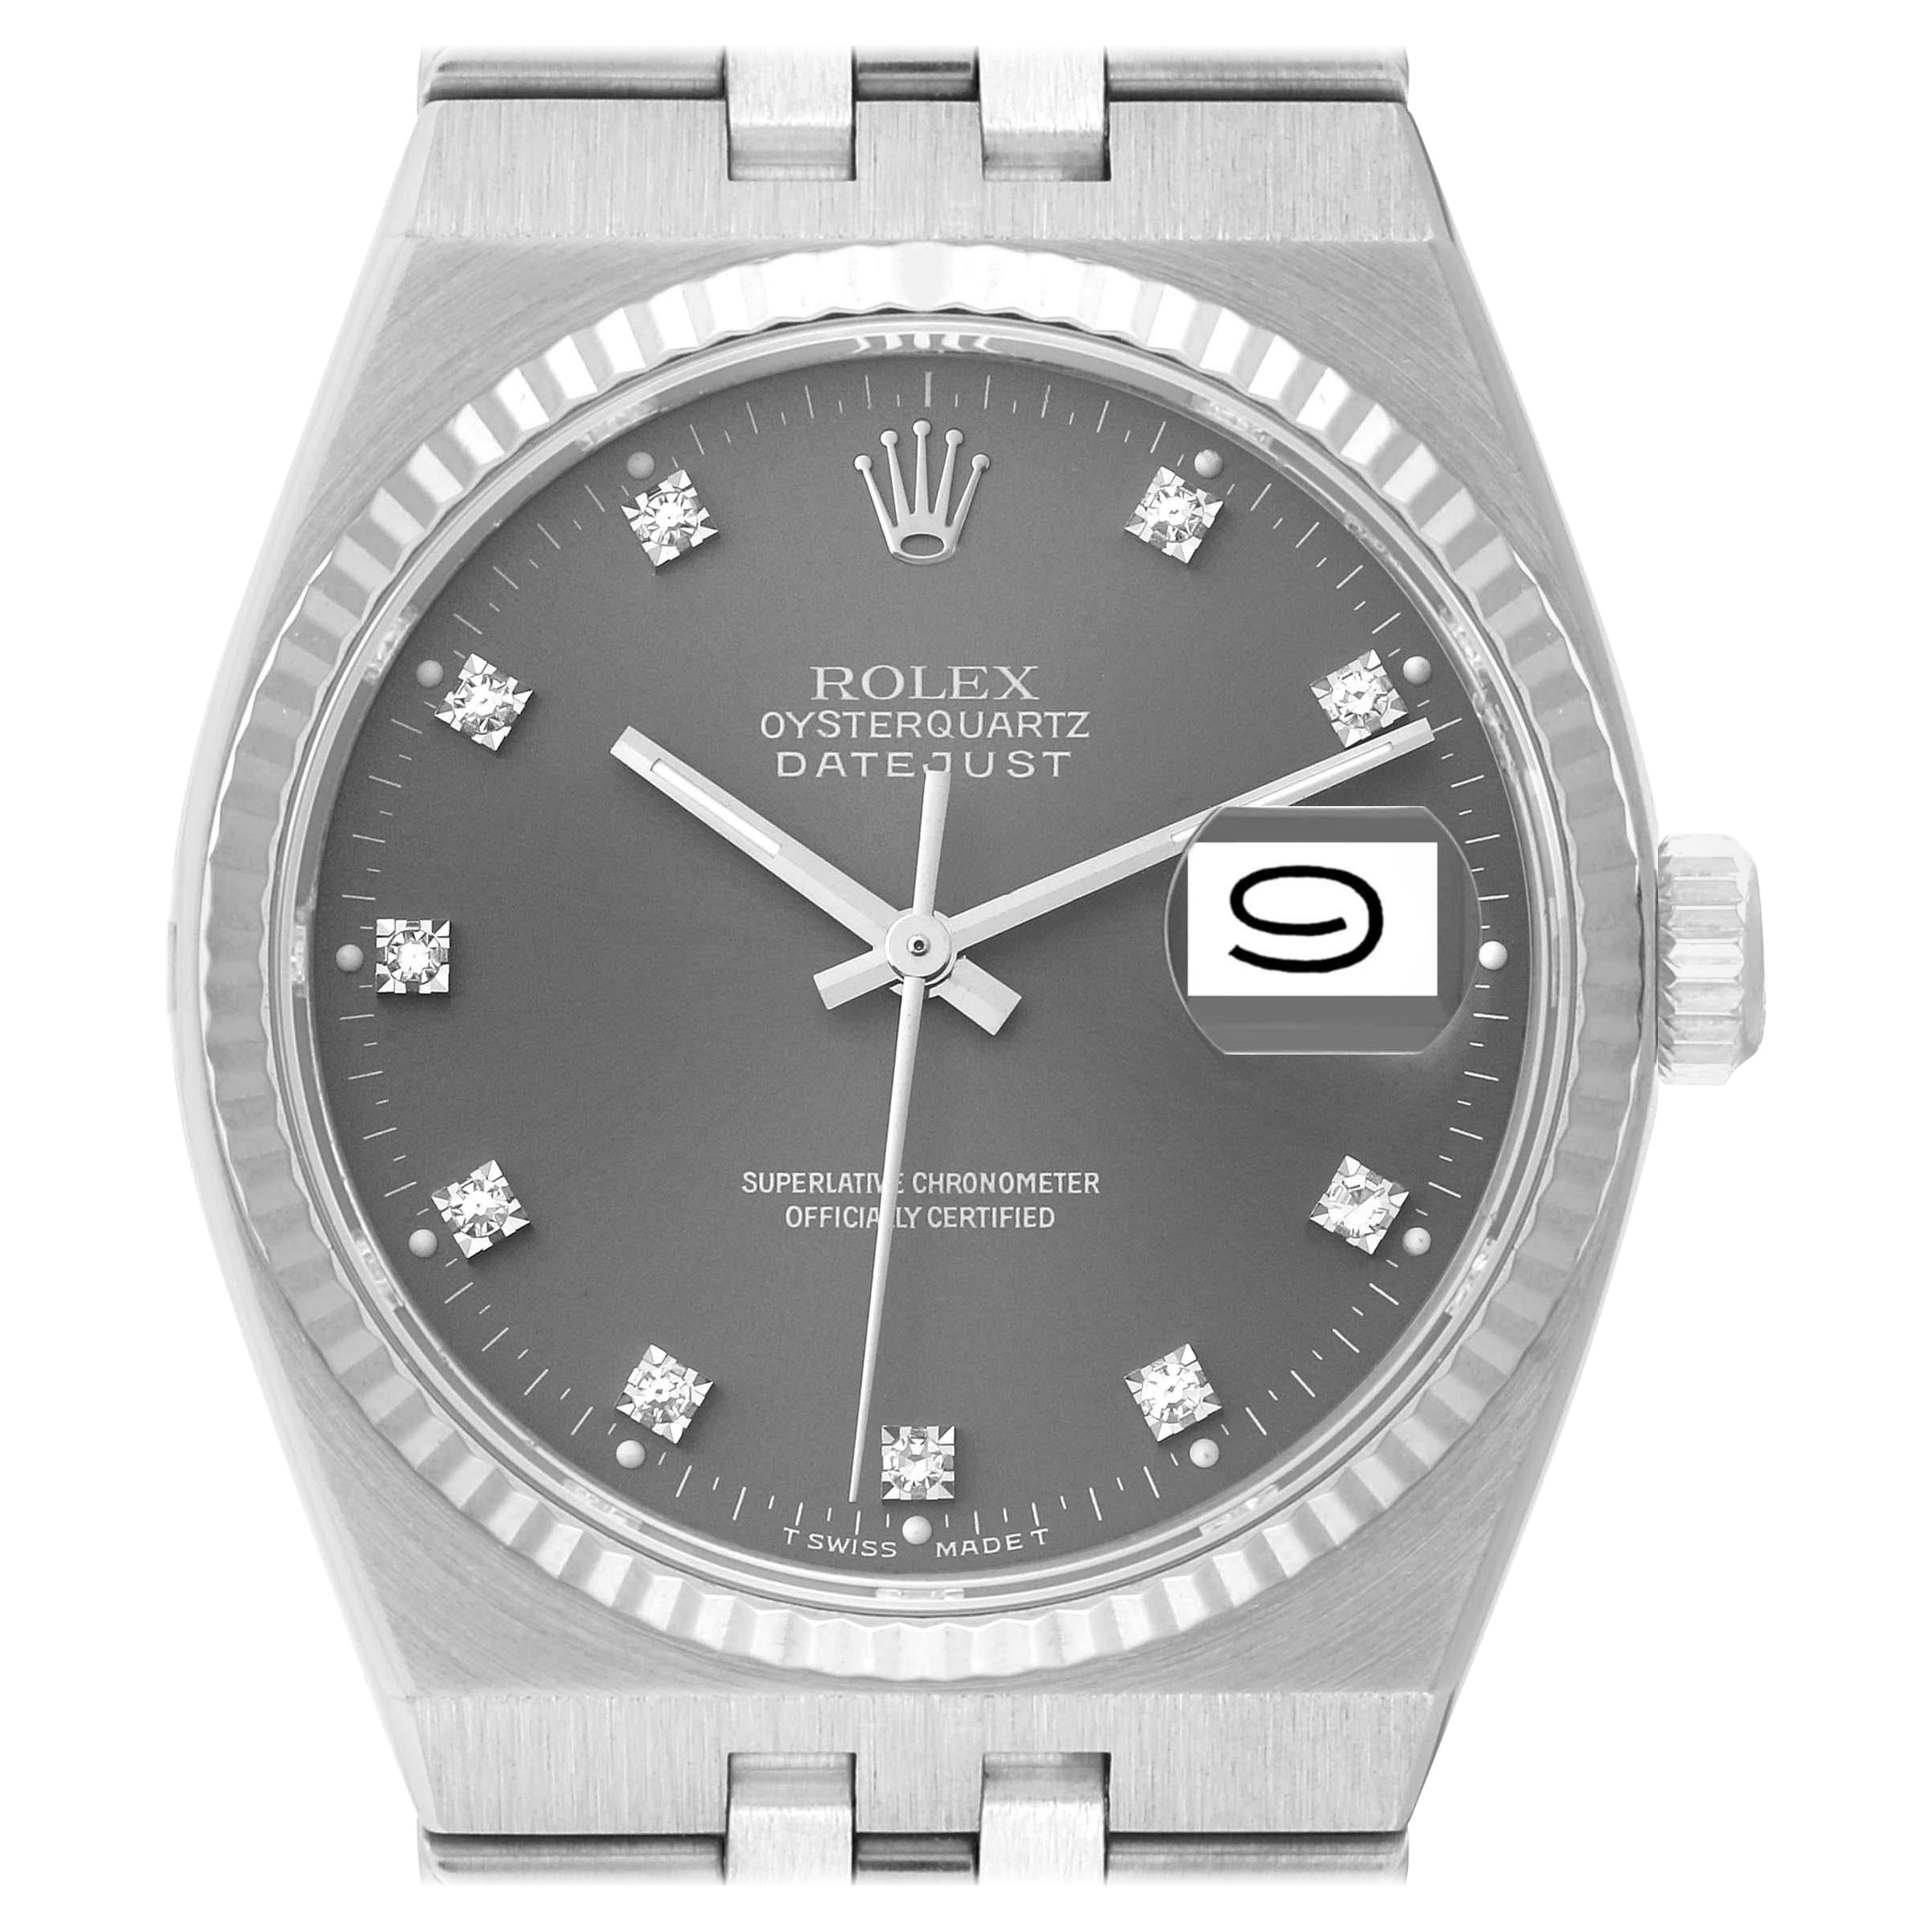 Rolex Oysterquartz Datejust Steel White Gold Diamond Dial Mens Watch 17014 For Sale